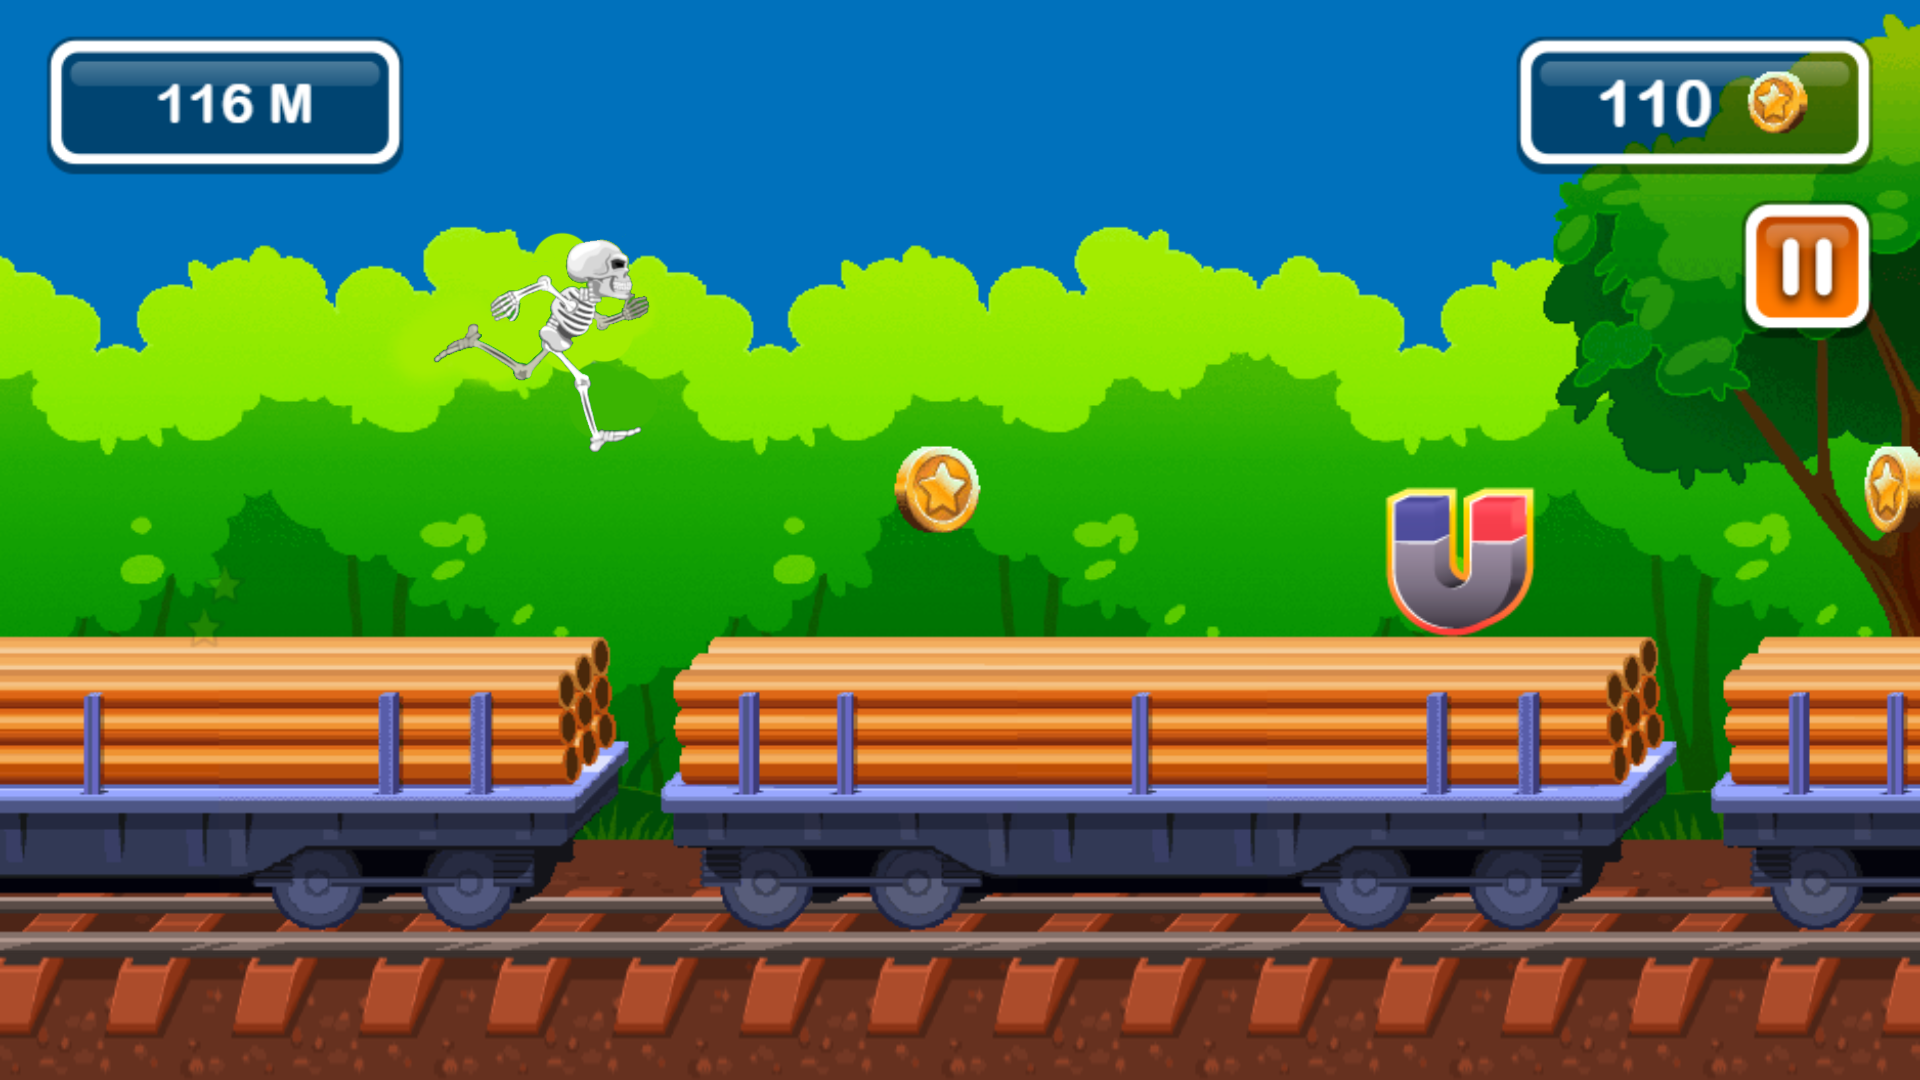 Subway Runner — play online for free on Yandex Games